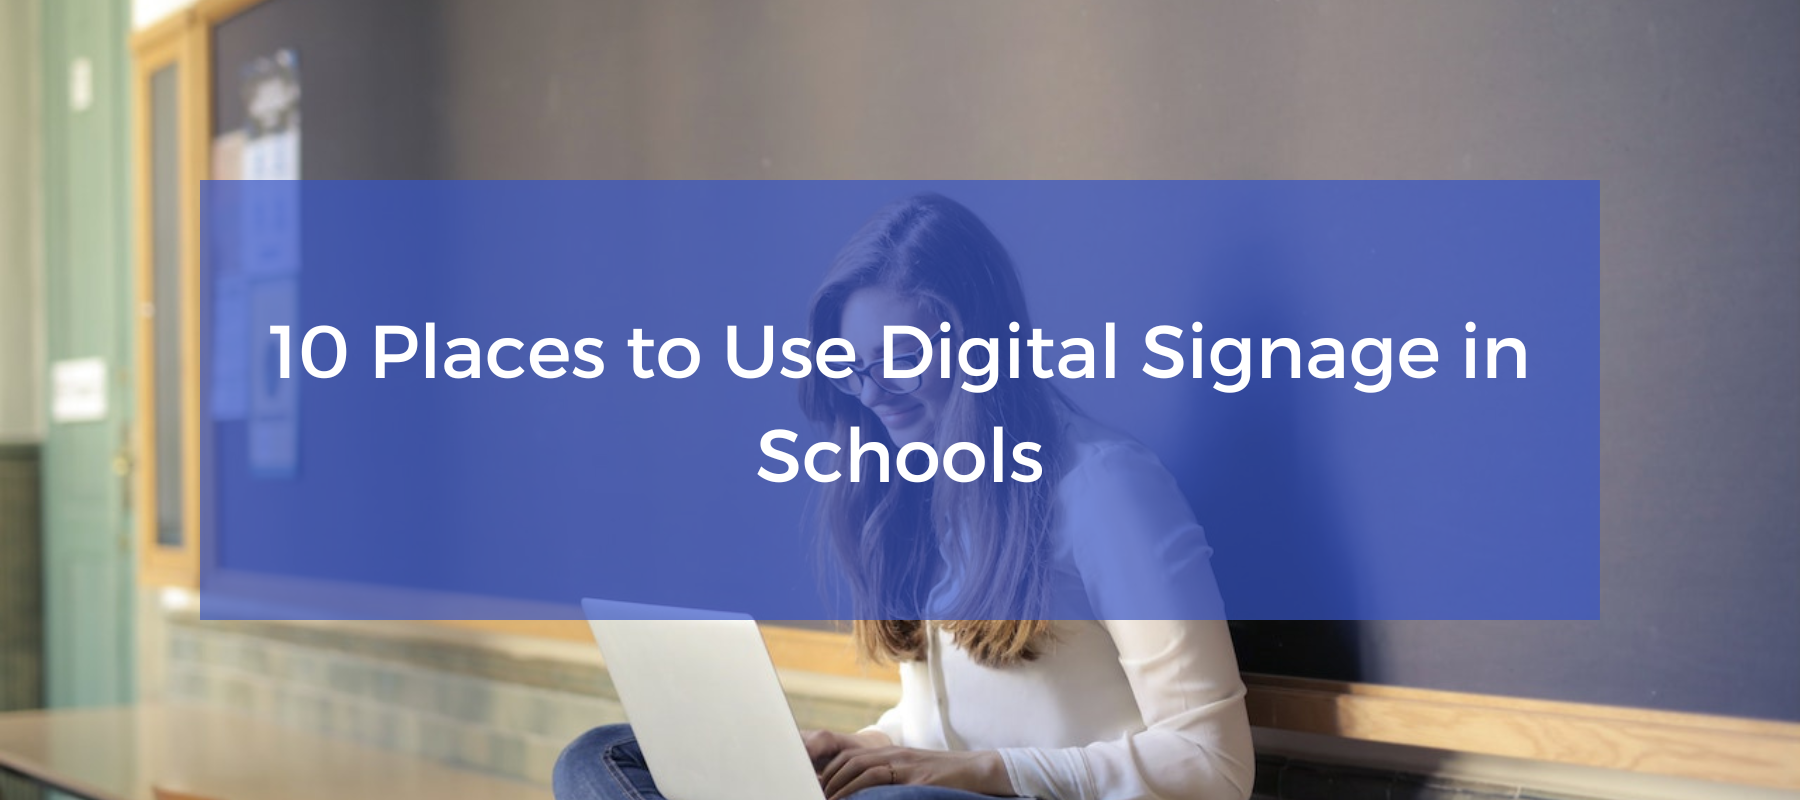 10 places to use digital signage in schools